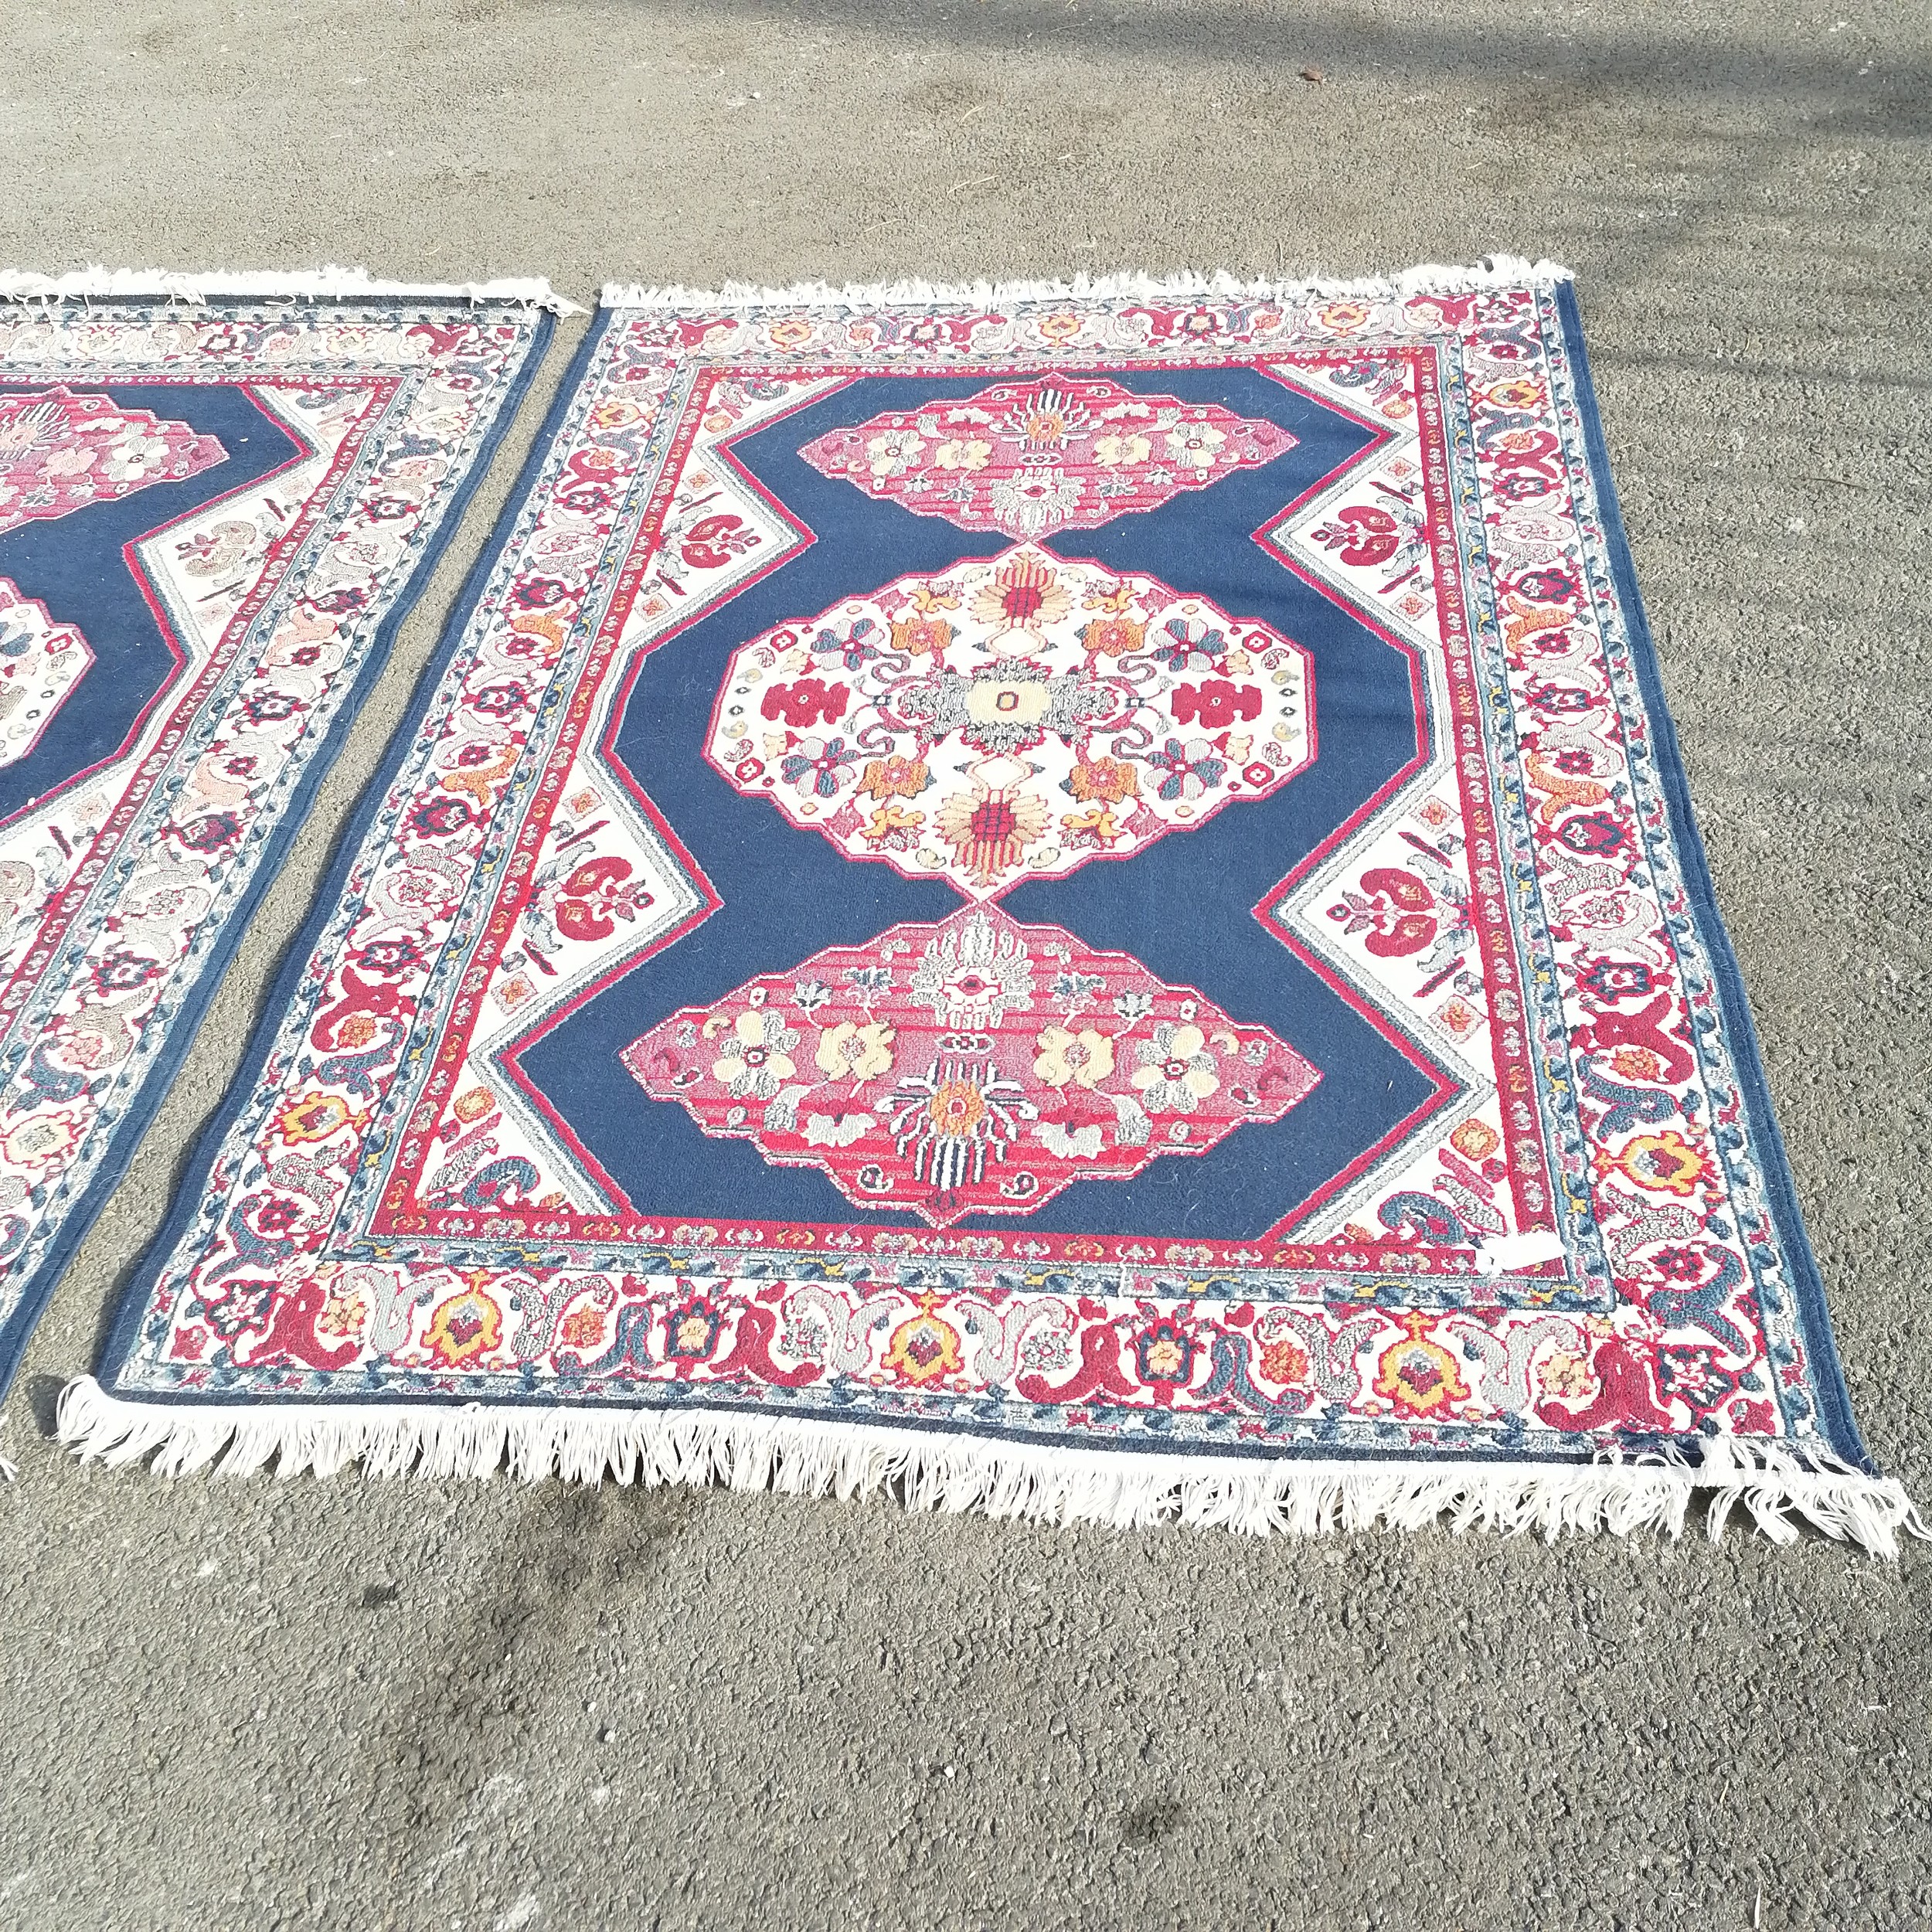 3 x blue ground carpets 230 cm x 168 cm in used condition - Image 4 of 4